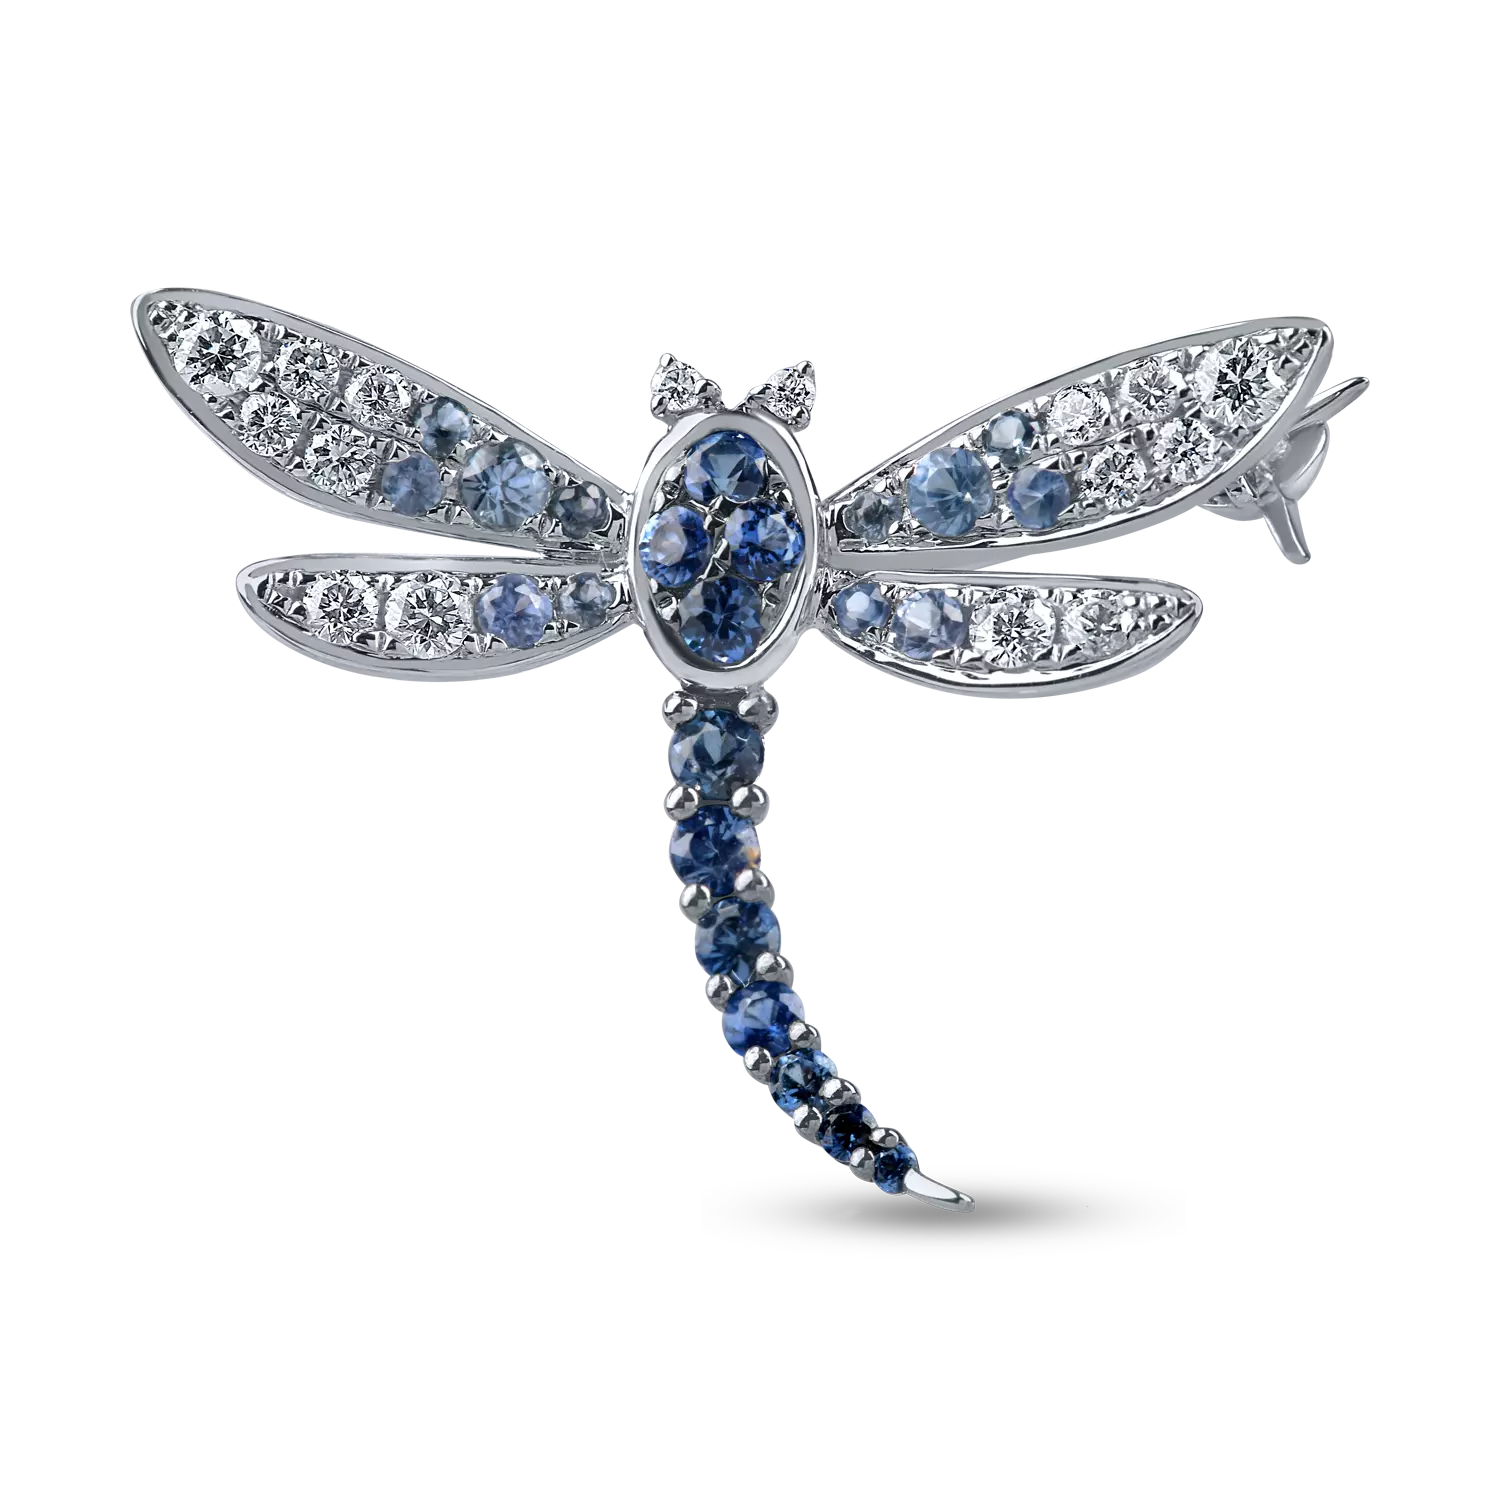 White gold dragonfly brooch with 0.5ct sapphires and 0.2ct diamonds